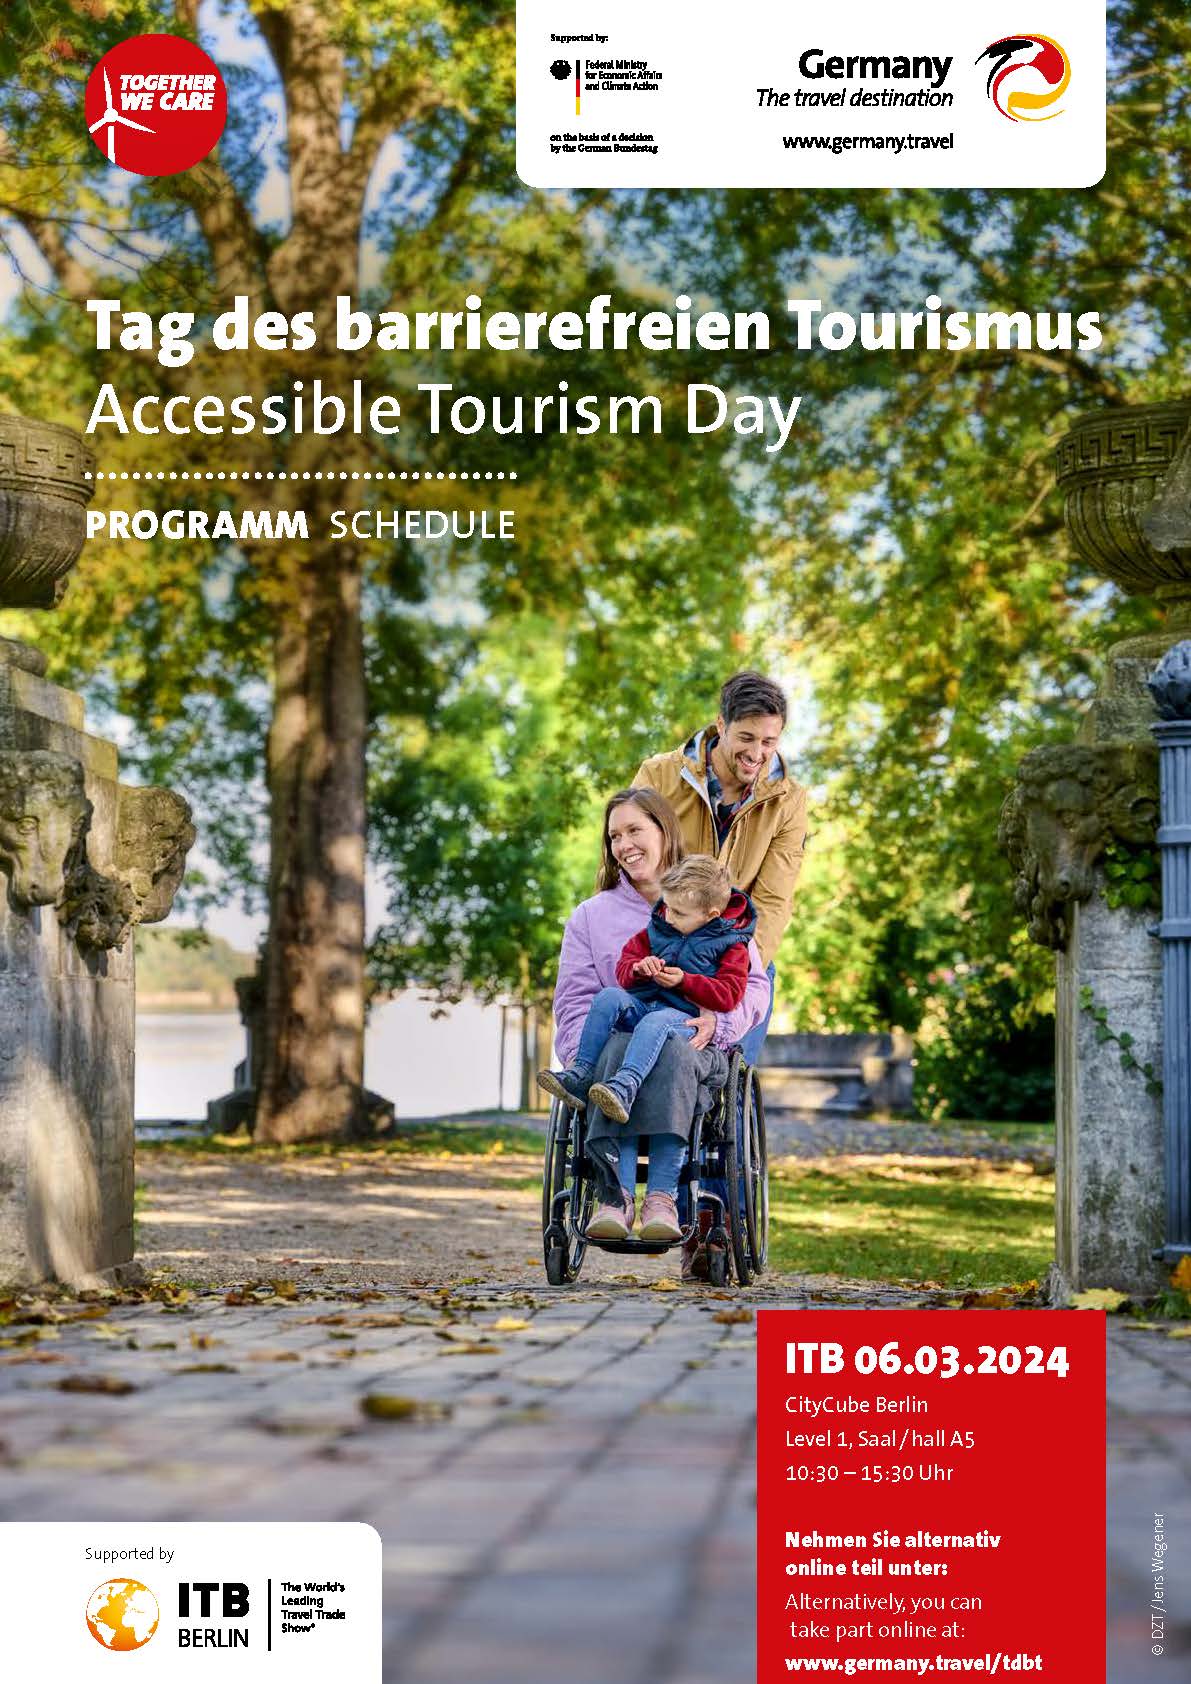 Program booklet for Accessible Tourism Day